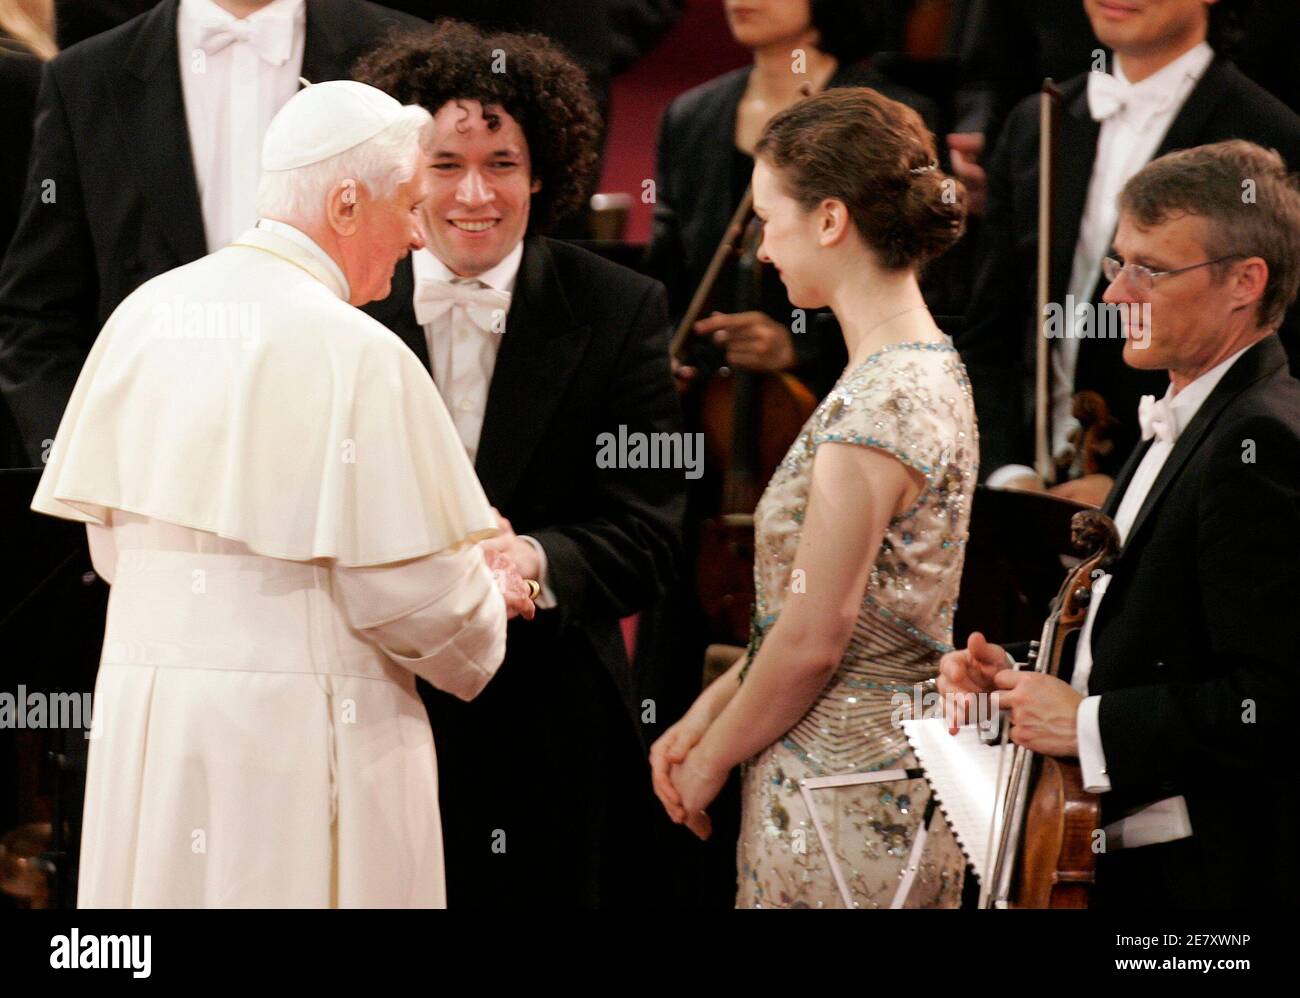 Pope Benedict XVI greets solo violinist Hilary Hahn (2nd R) and conductor  Gustavo Dudamel (2nd L) after they performed a special concert for Pope's  80th birthday at Paul VI hall at Vatican